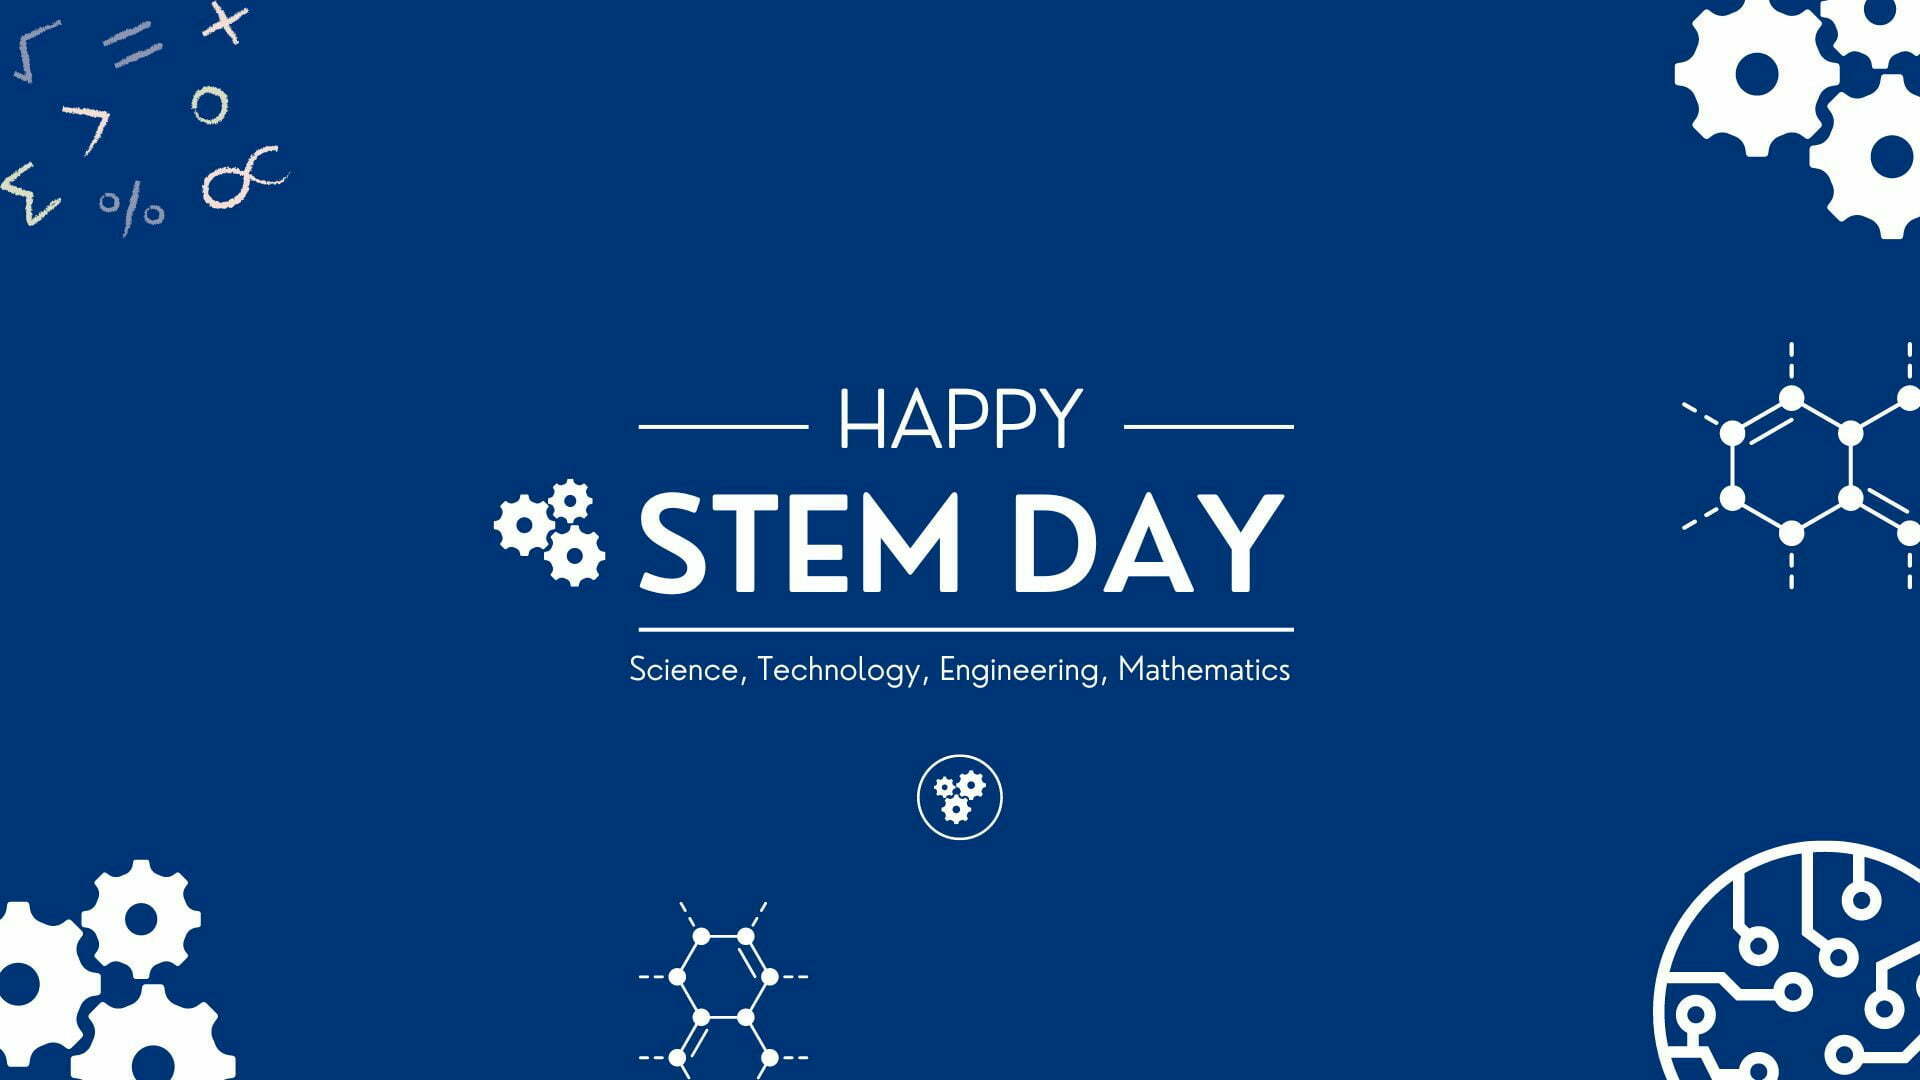 A blue and white decorative picture containing the text "Happy Stem Day, Science, Technology, Engineering, Mathematics."